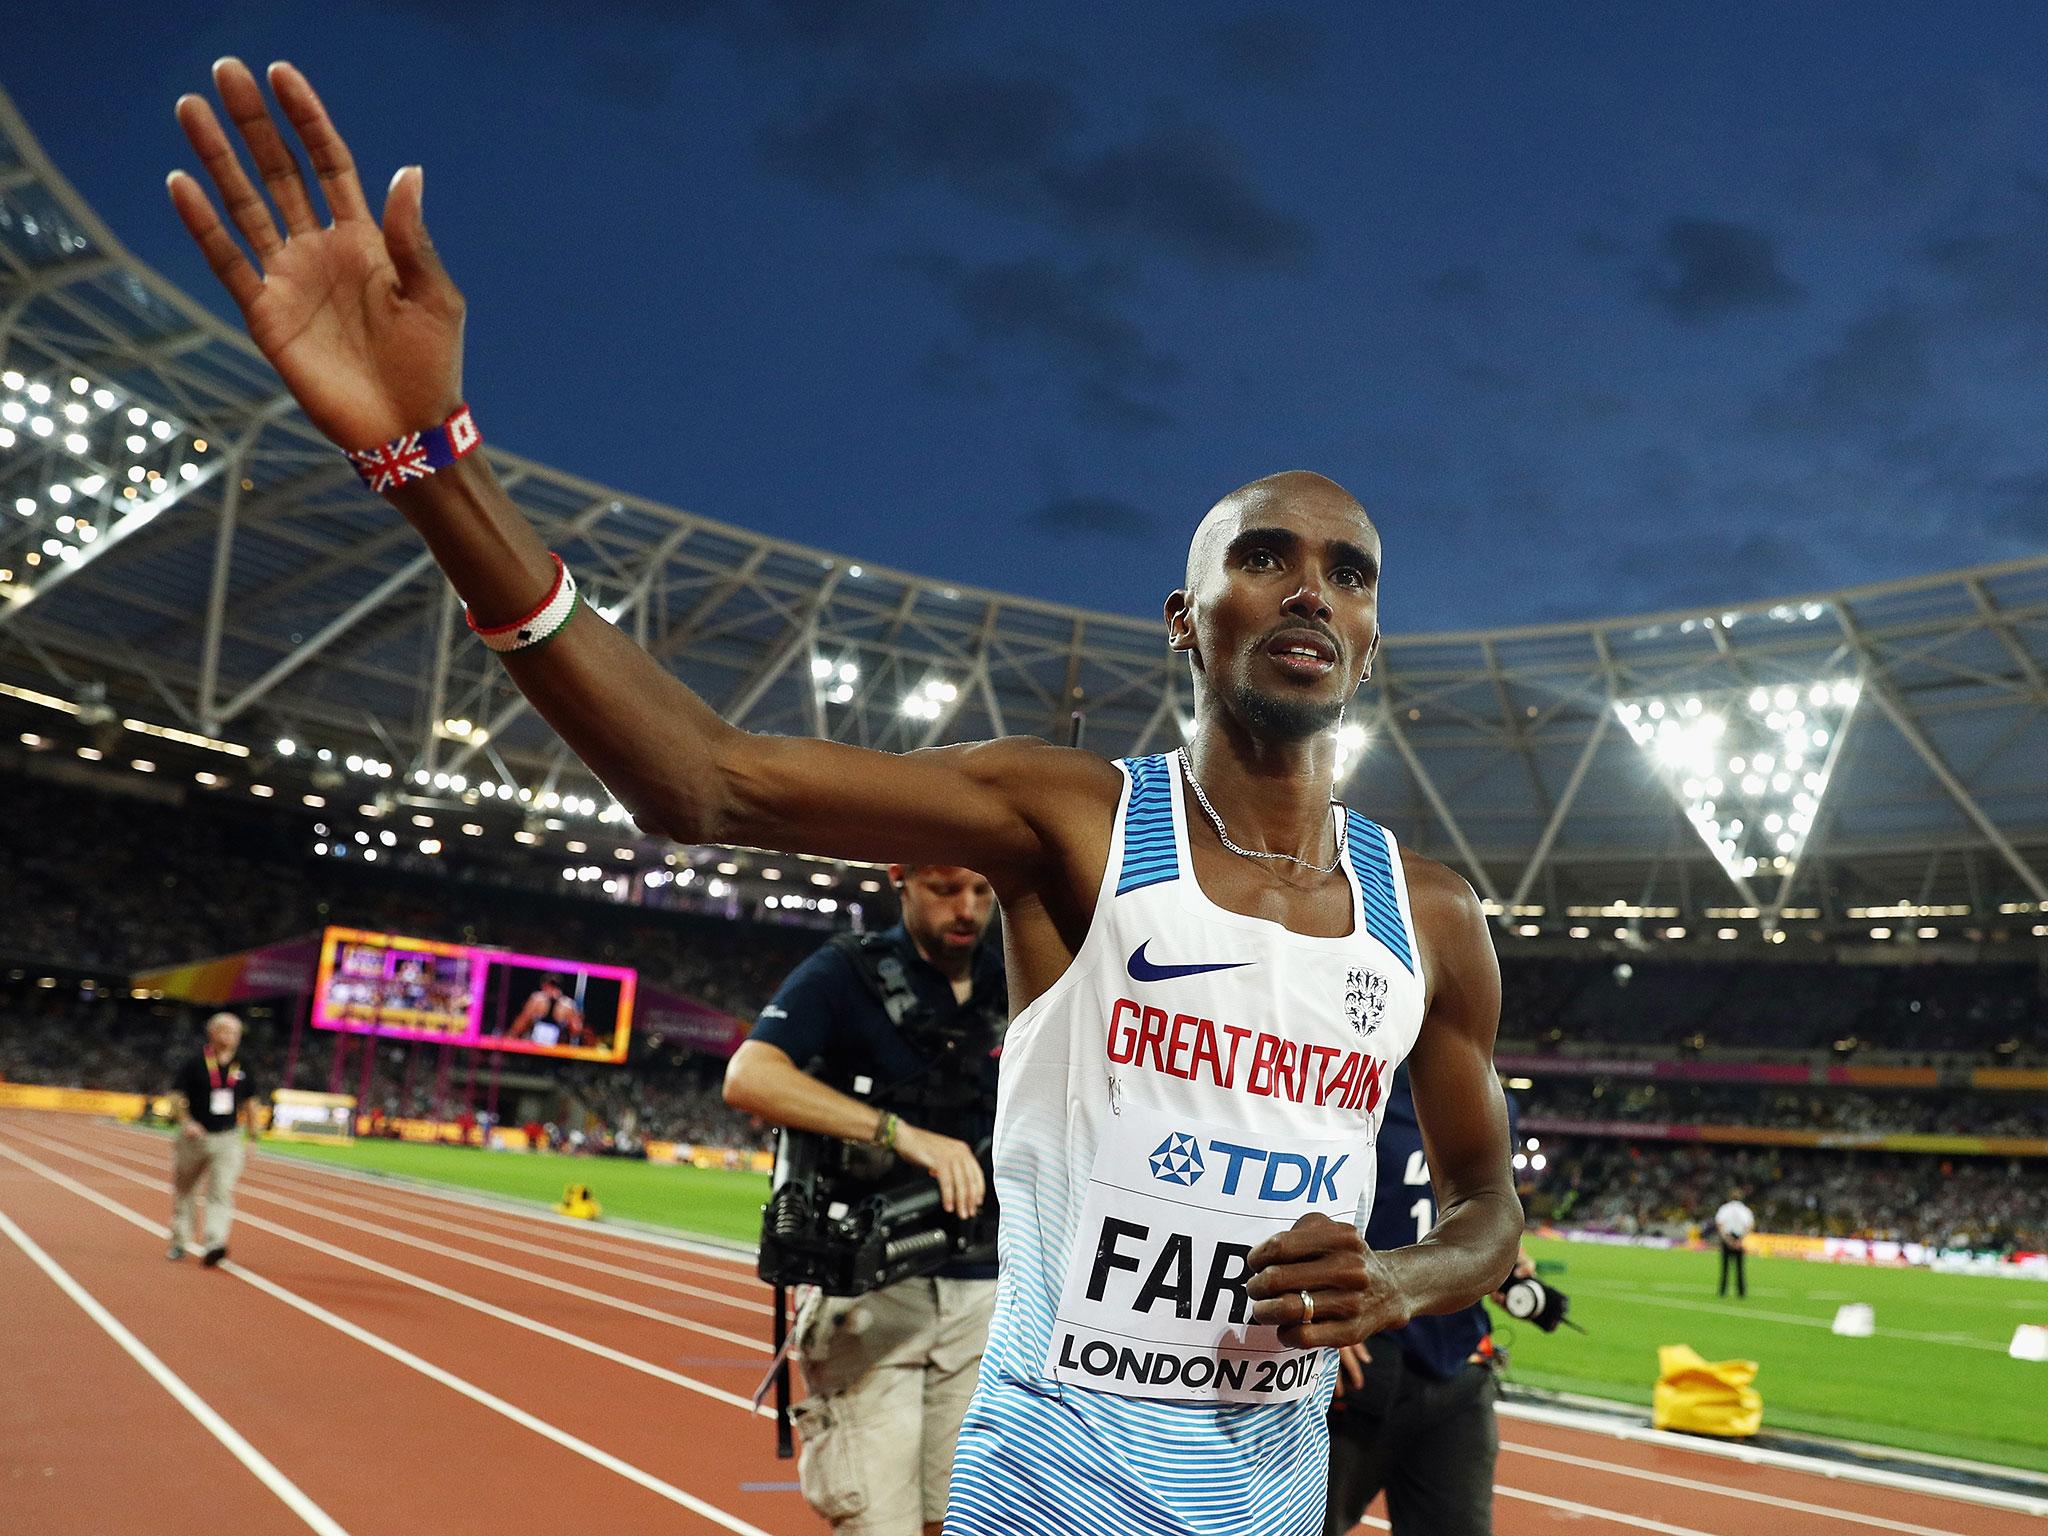 &#13;
Farah waves goodbye to the crown in London &#13;